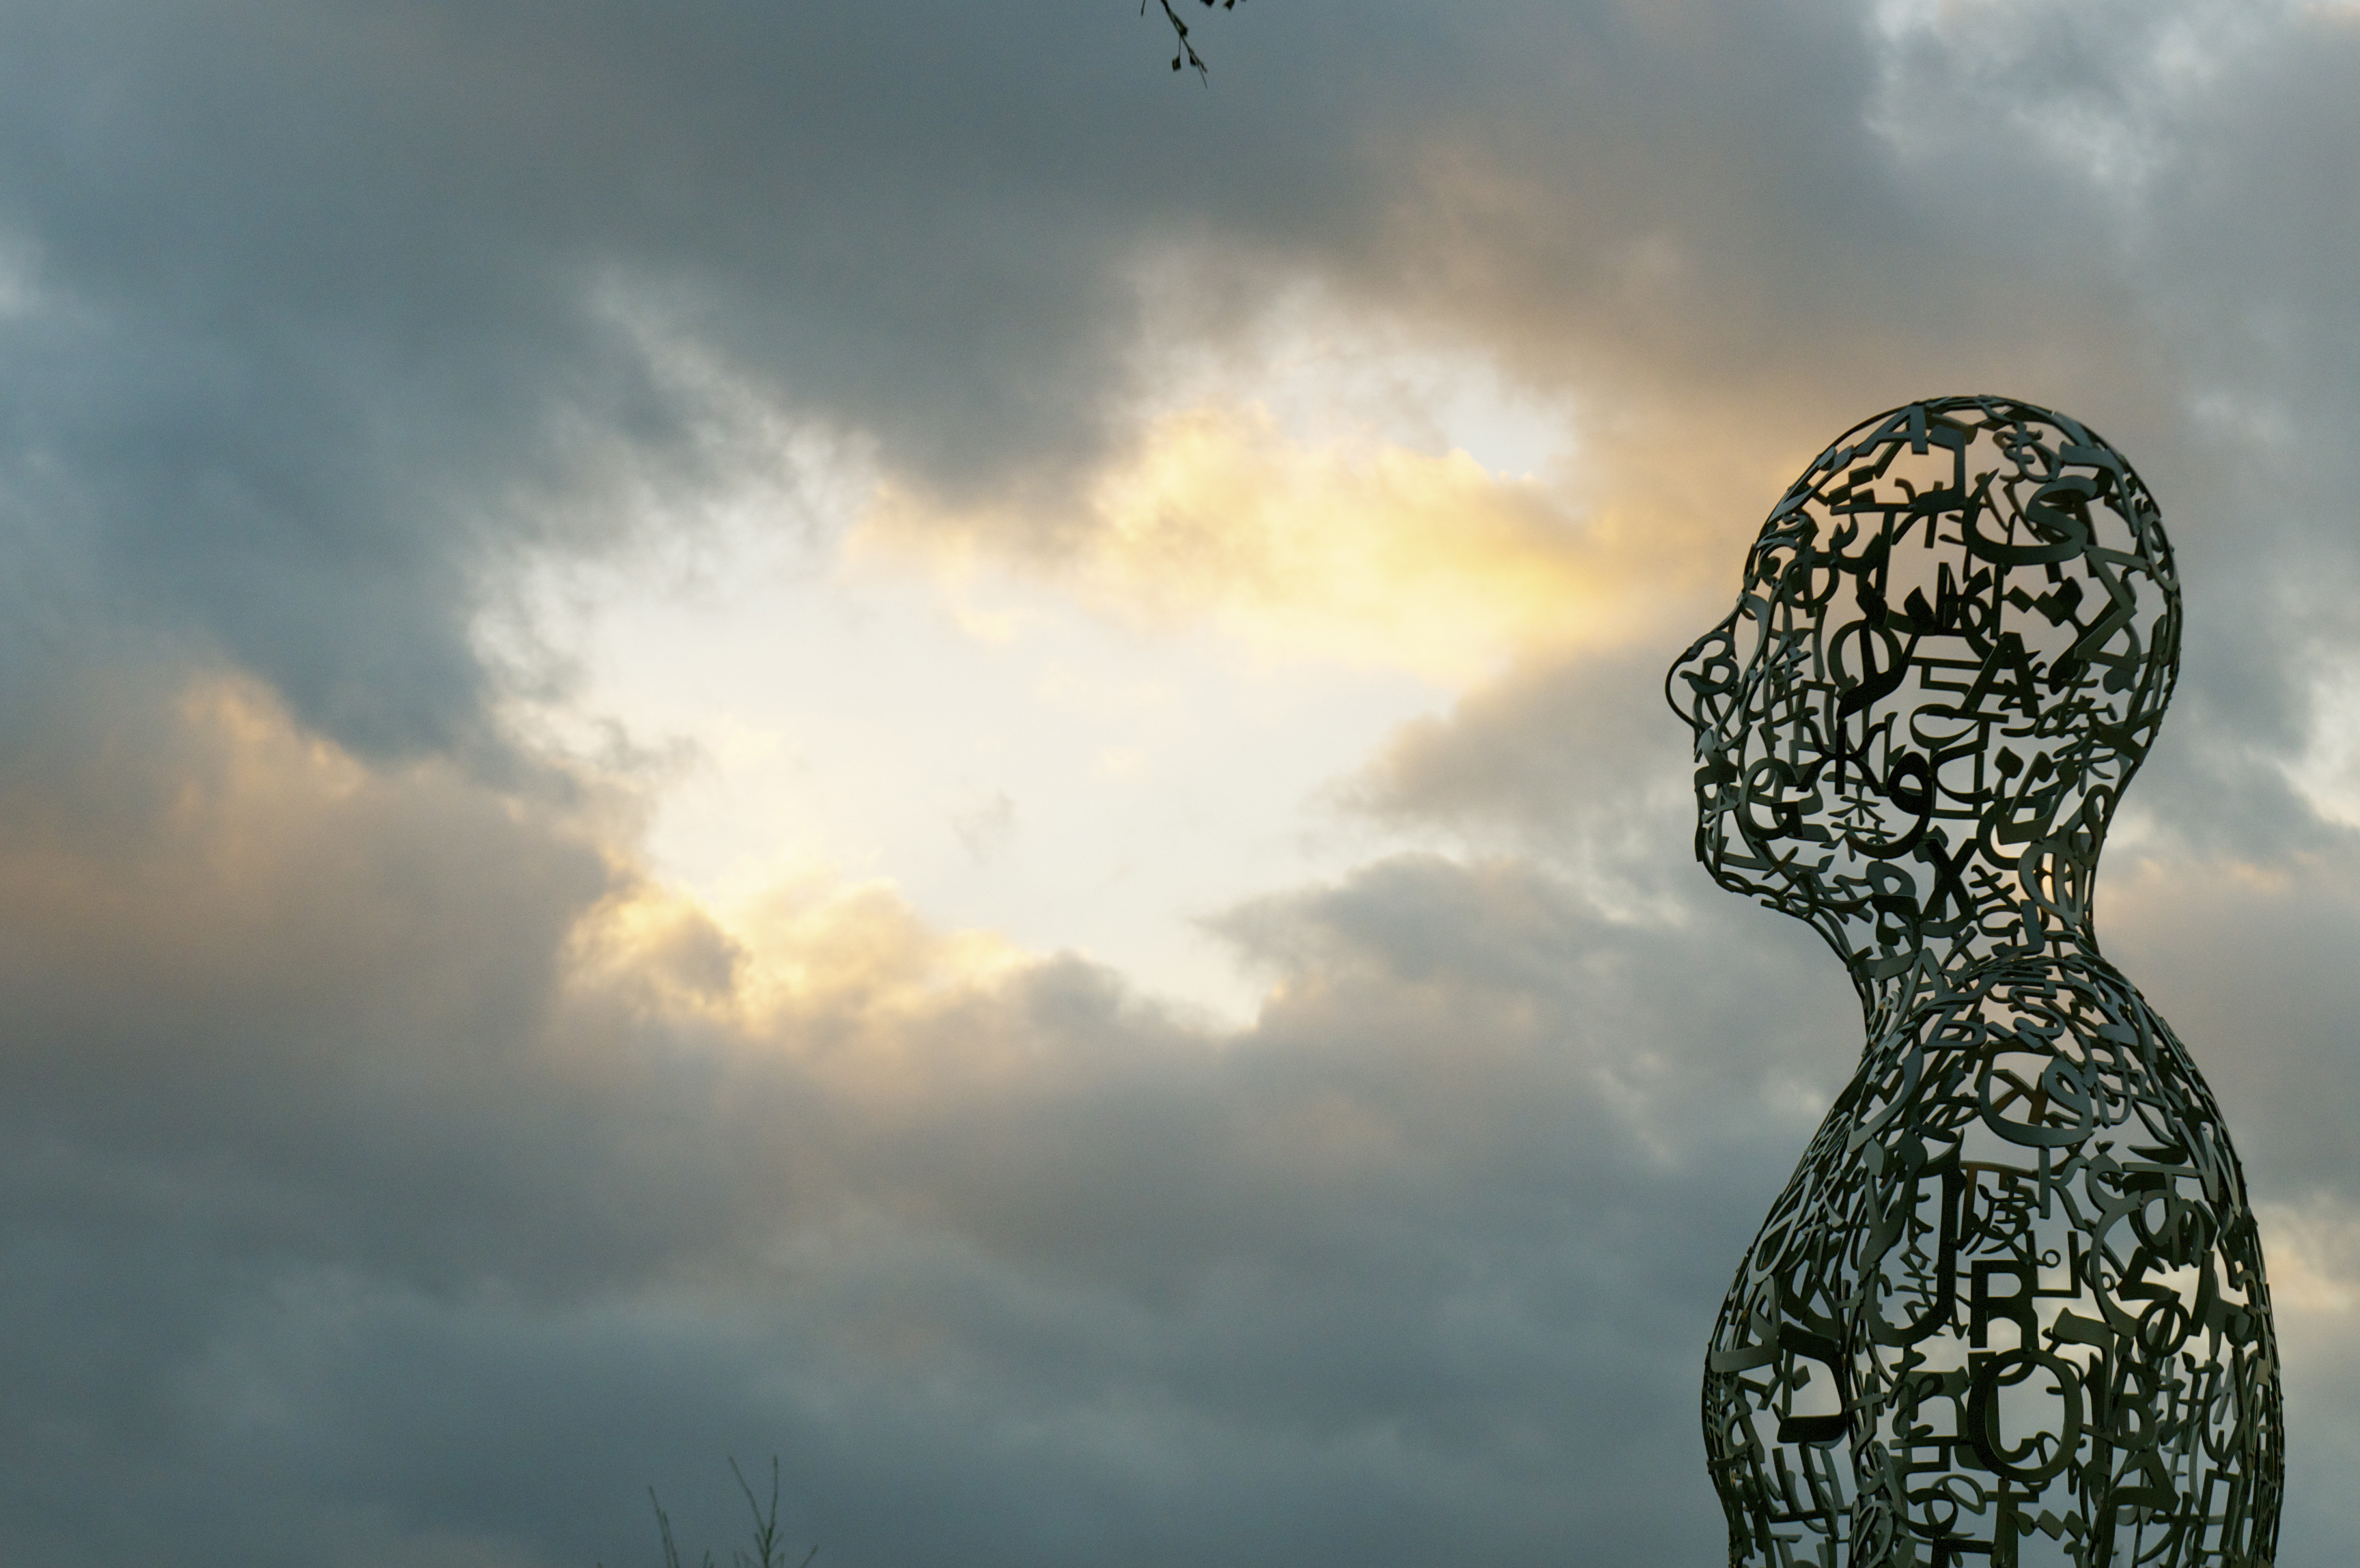 Silhouette of one of the Tolerance figures against the Houston sky moments before sunset. Photo: Zahid Alibhai